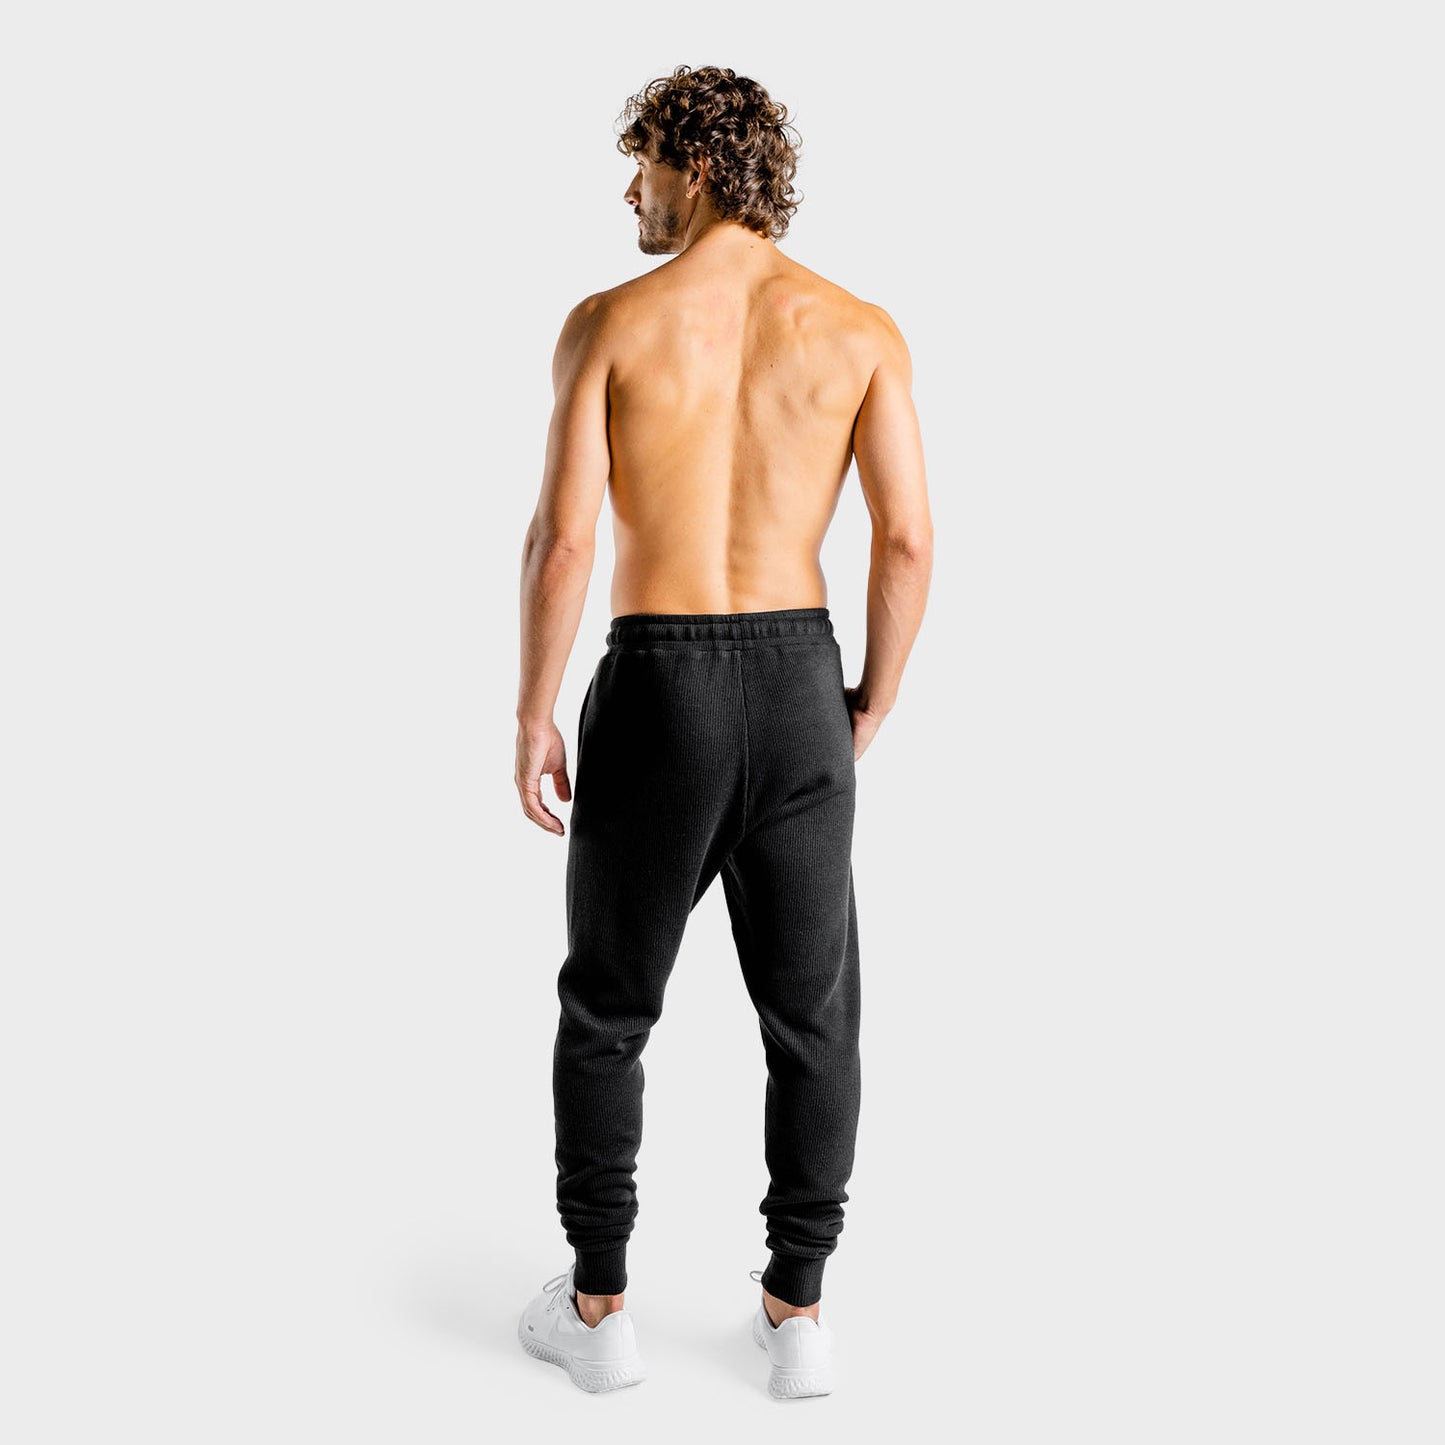 squatwolf-gym-wear-luxe-joggers-black-workout-pants-for-men